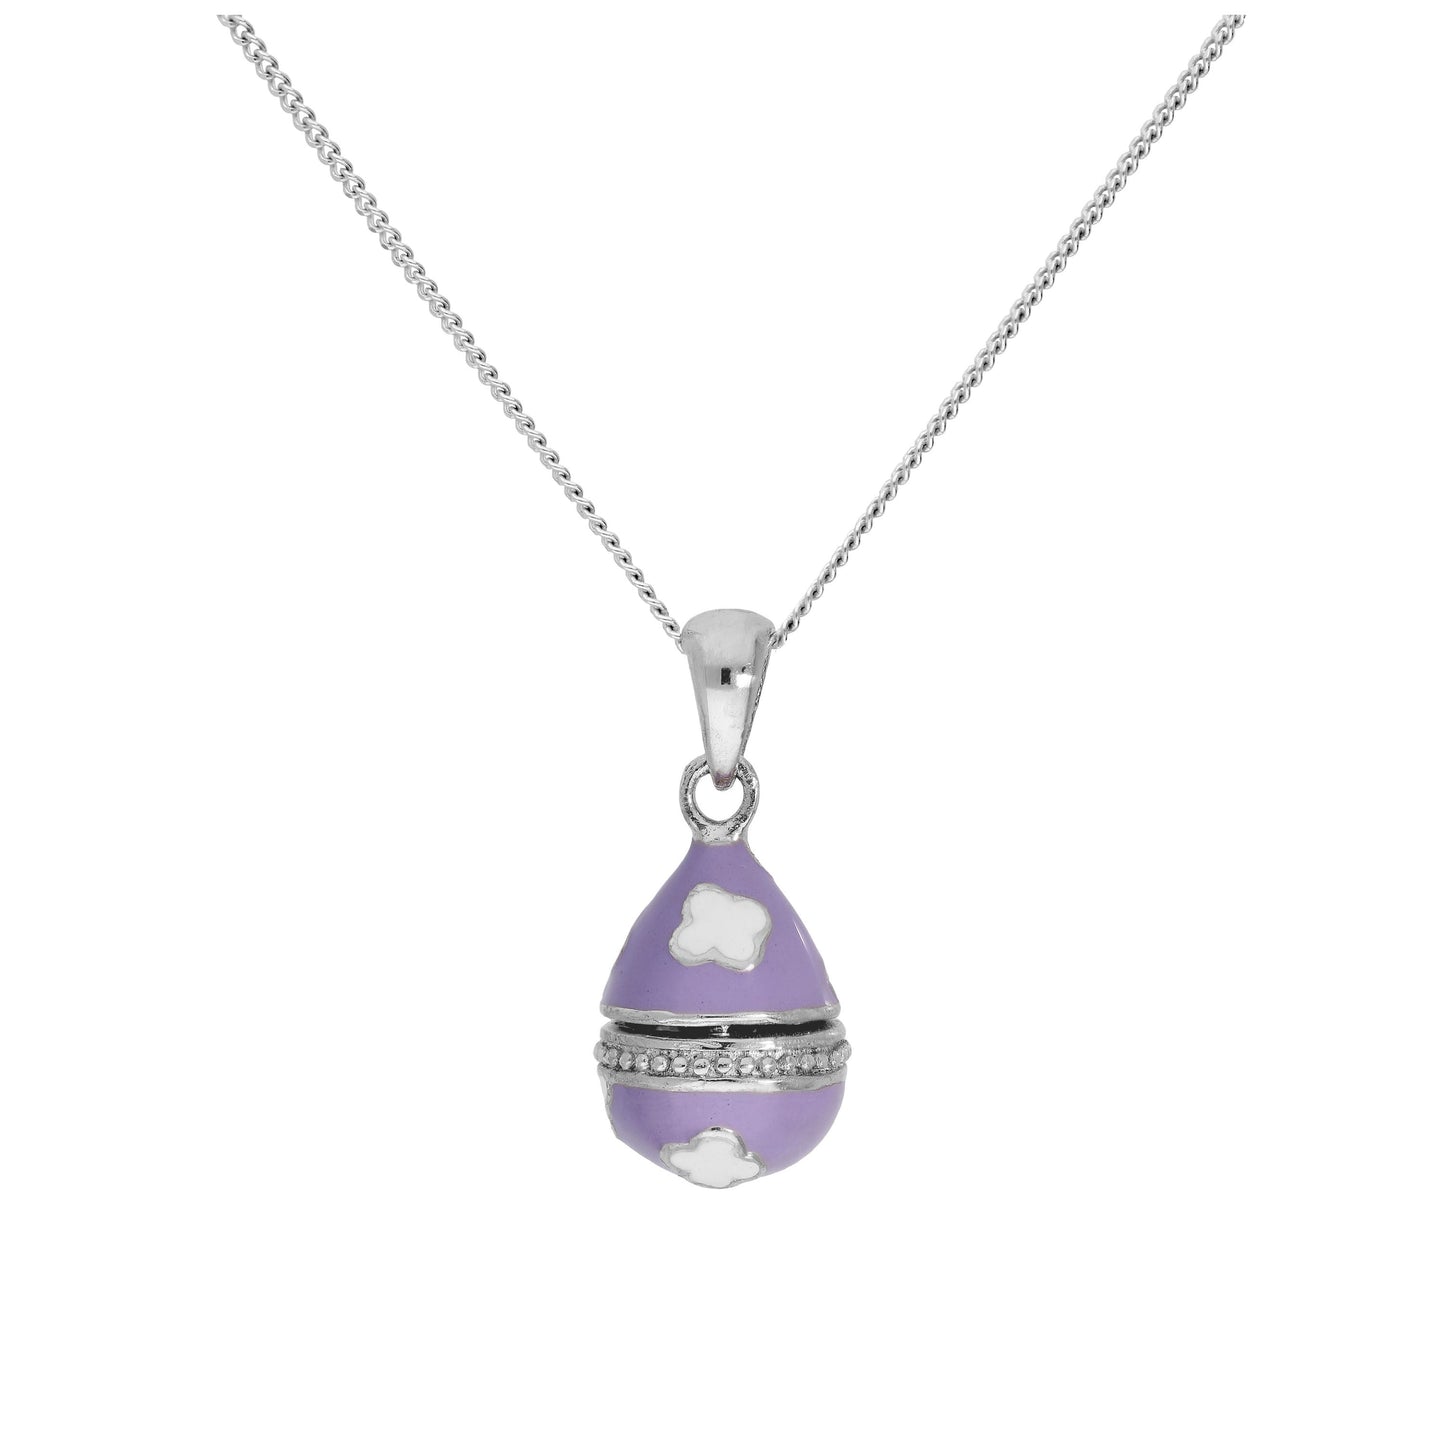 Sterling Silver Lilac Faberge Style Egg Pendant on 16+2 Inches Diamond Cut Chain